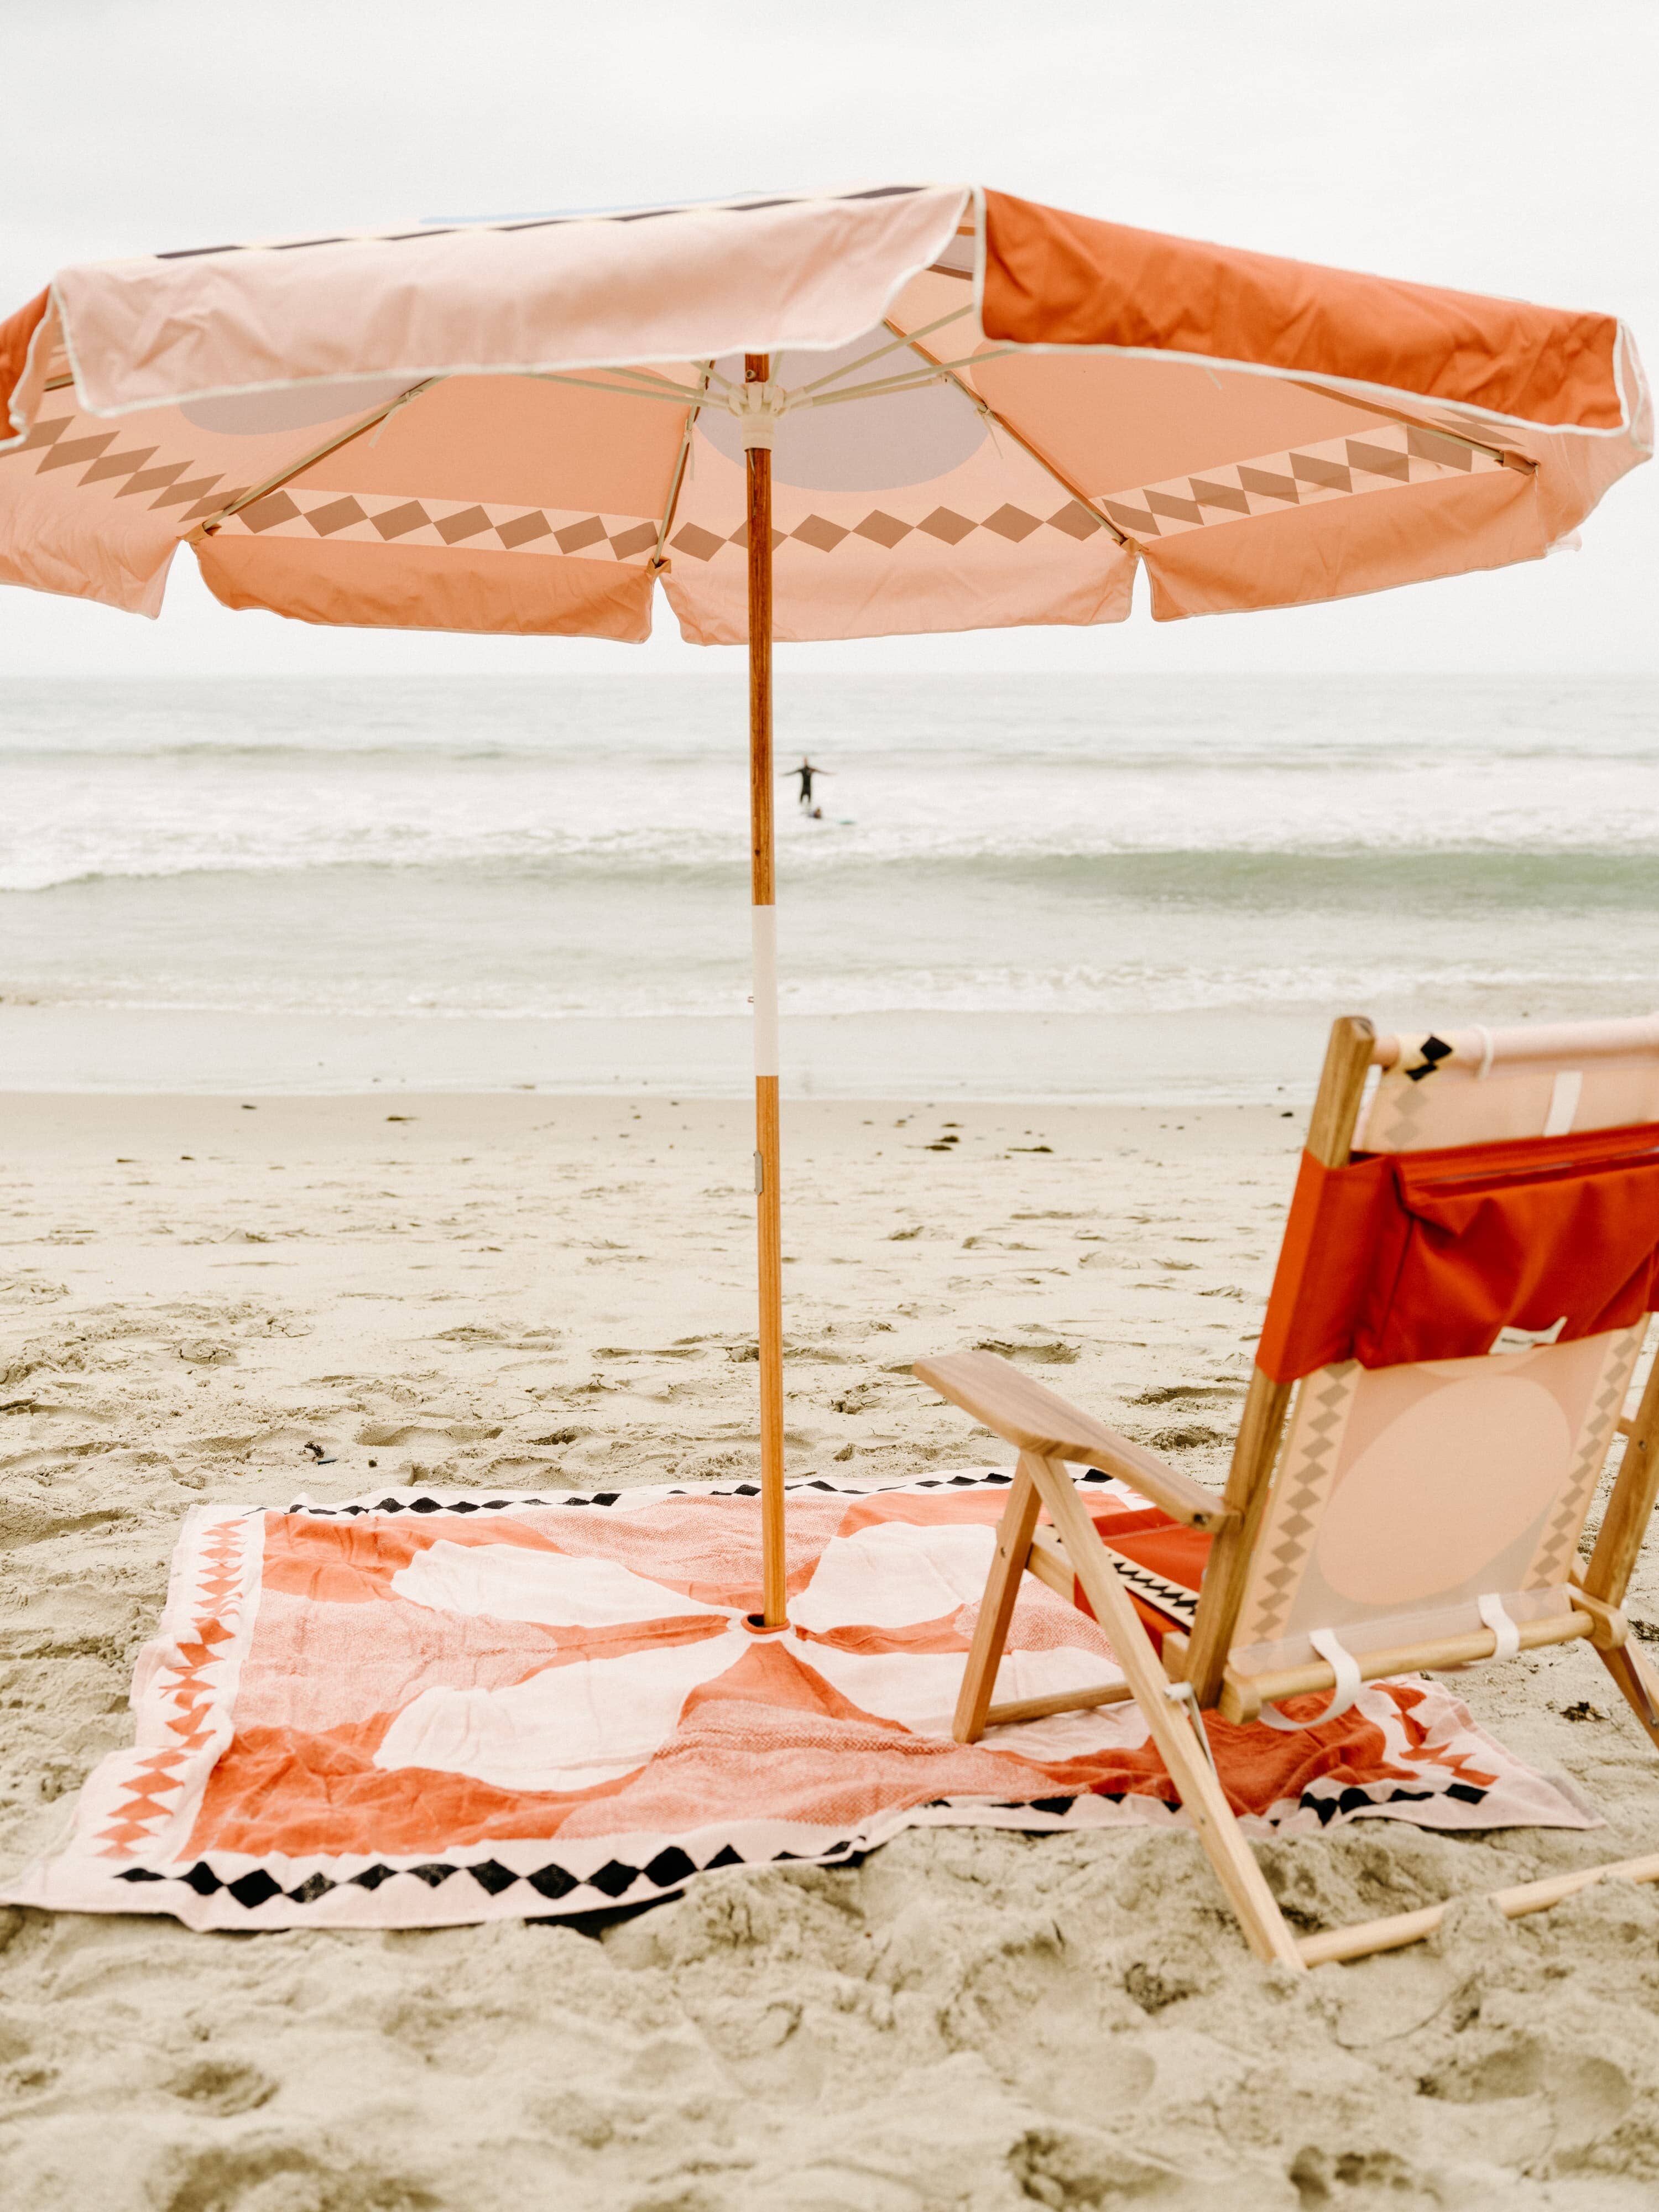 Beach set up with diamond pink umbrella, chair and blanket